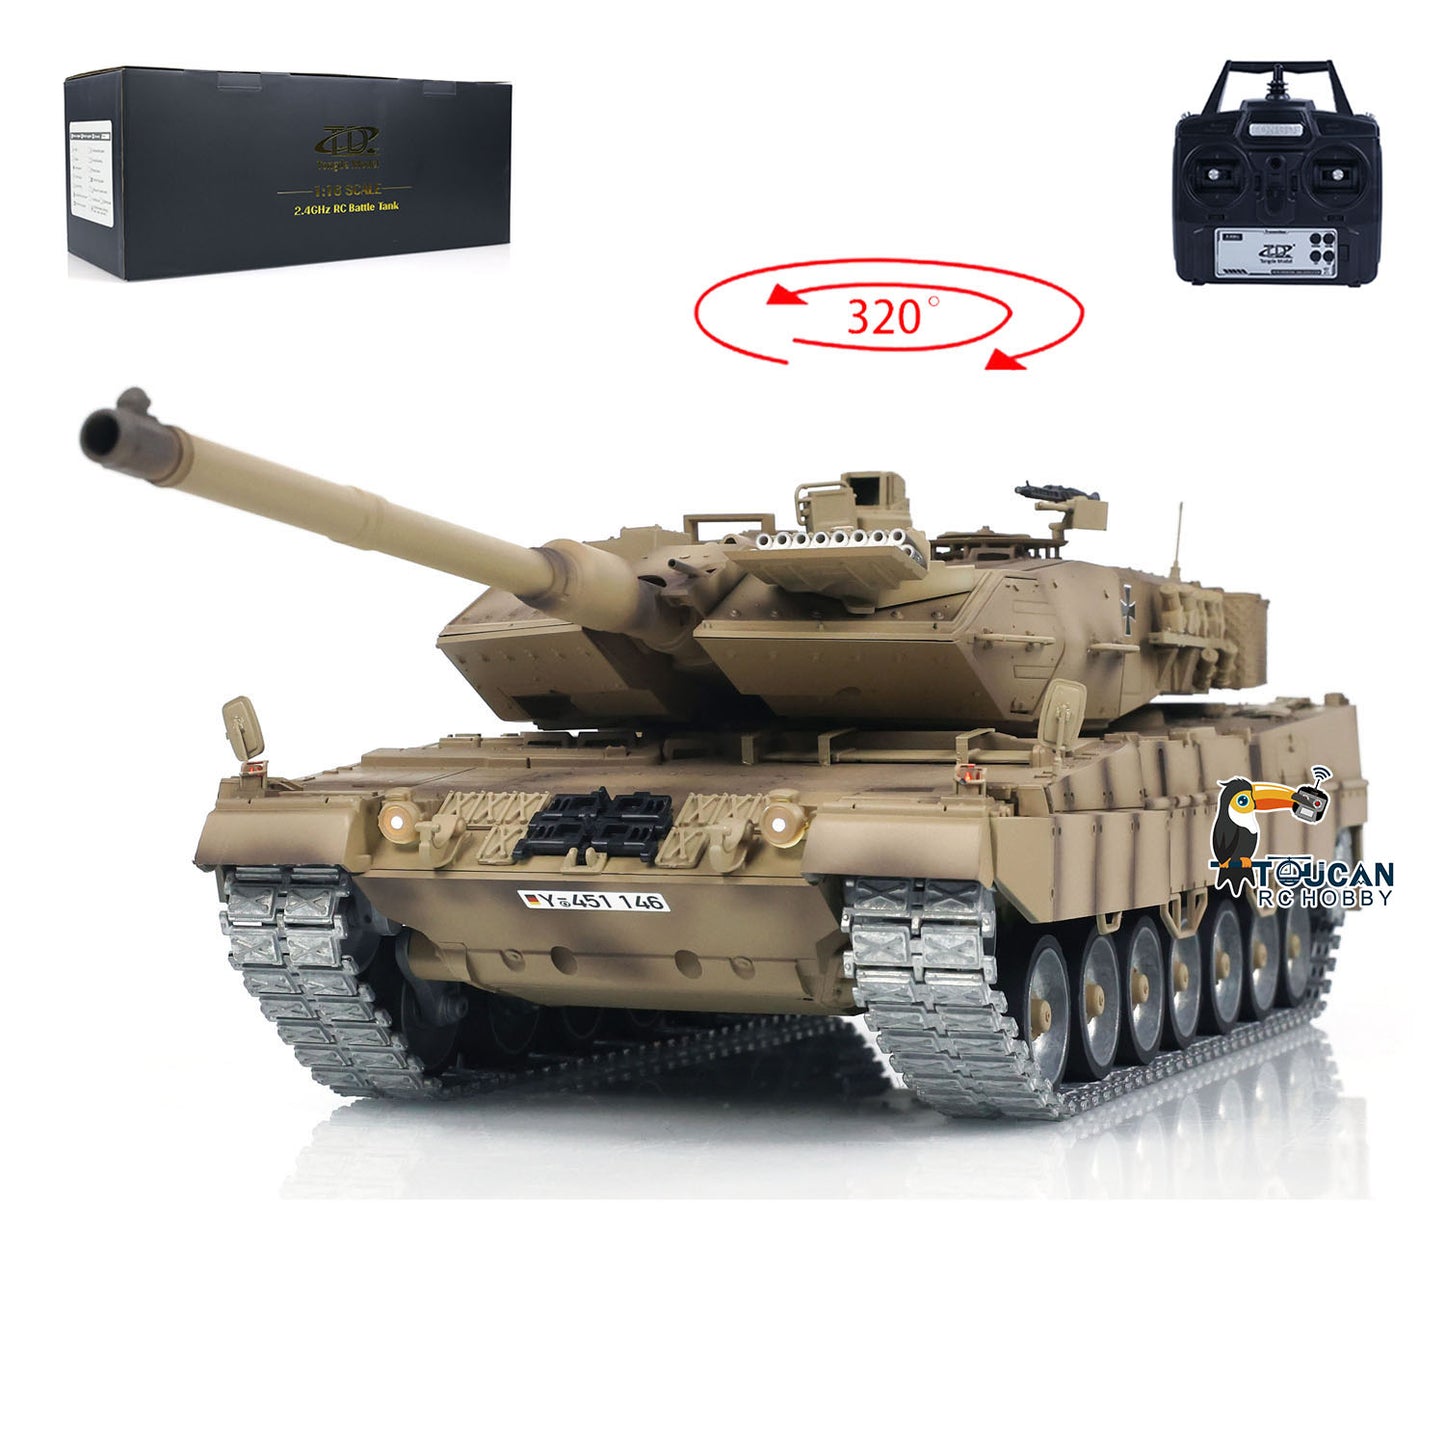 IN STOCK Tongde 1/16 RC Infrared Battle Tank German Leopard2A7 Electric Radio Control Military Vehicle Optional Version Painted Assembled